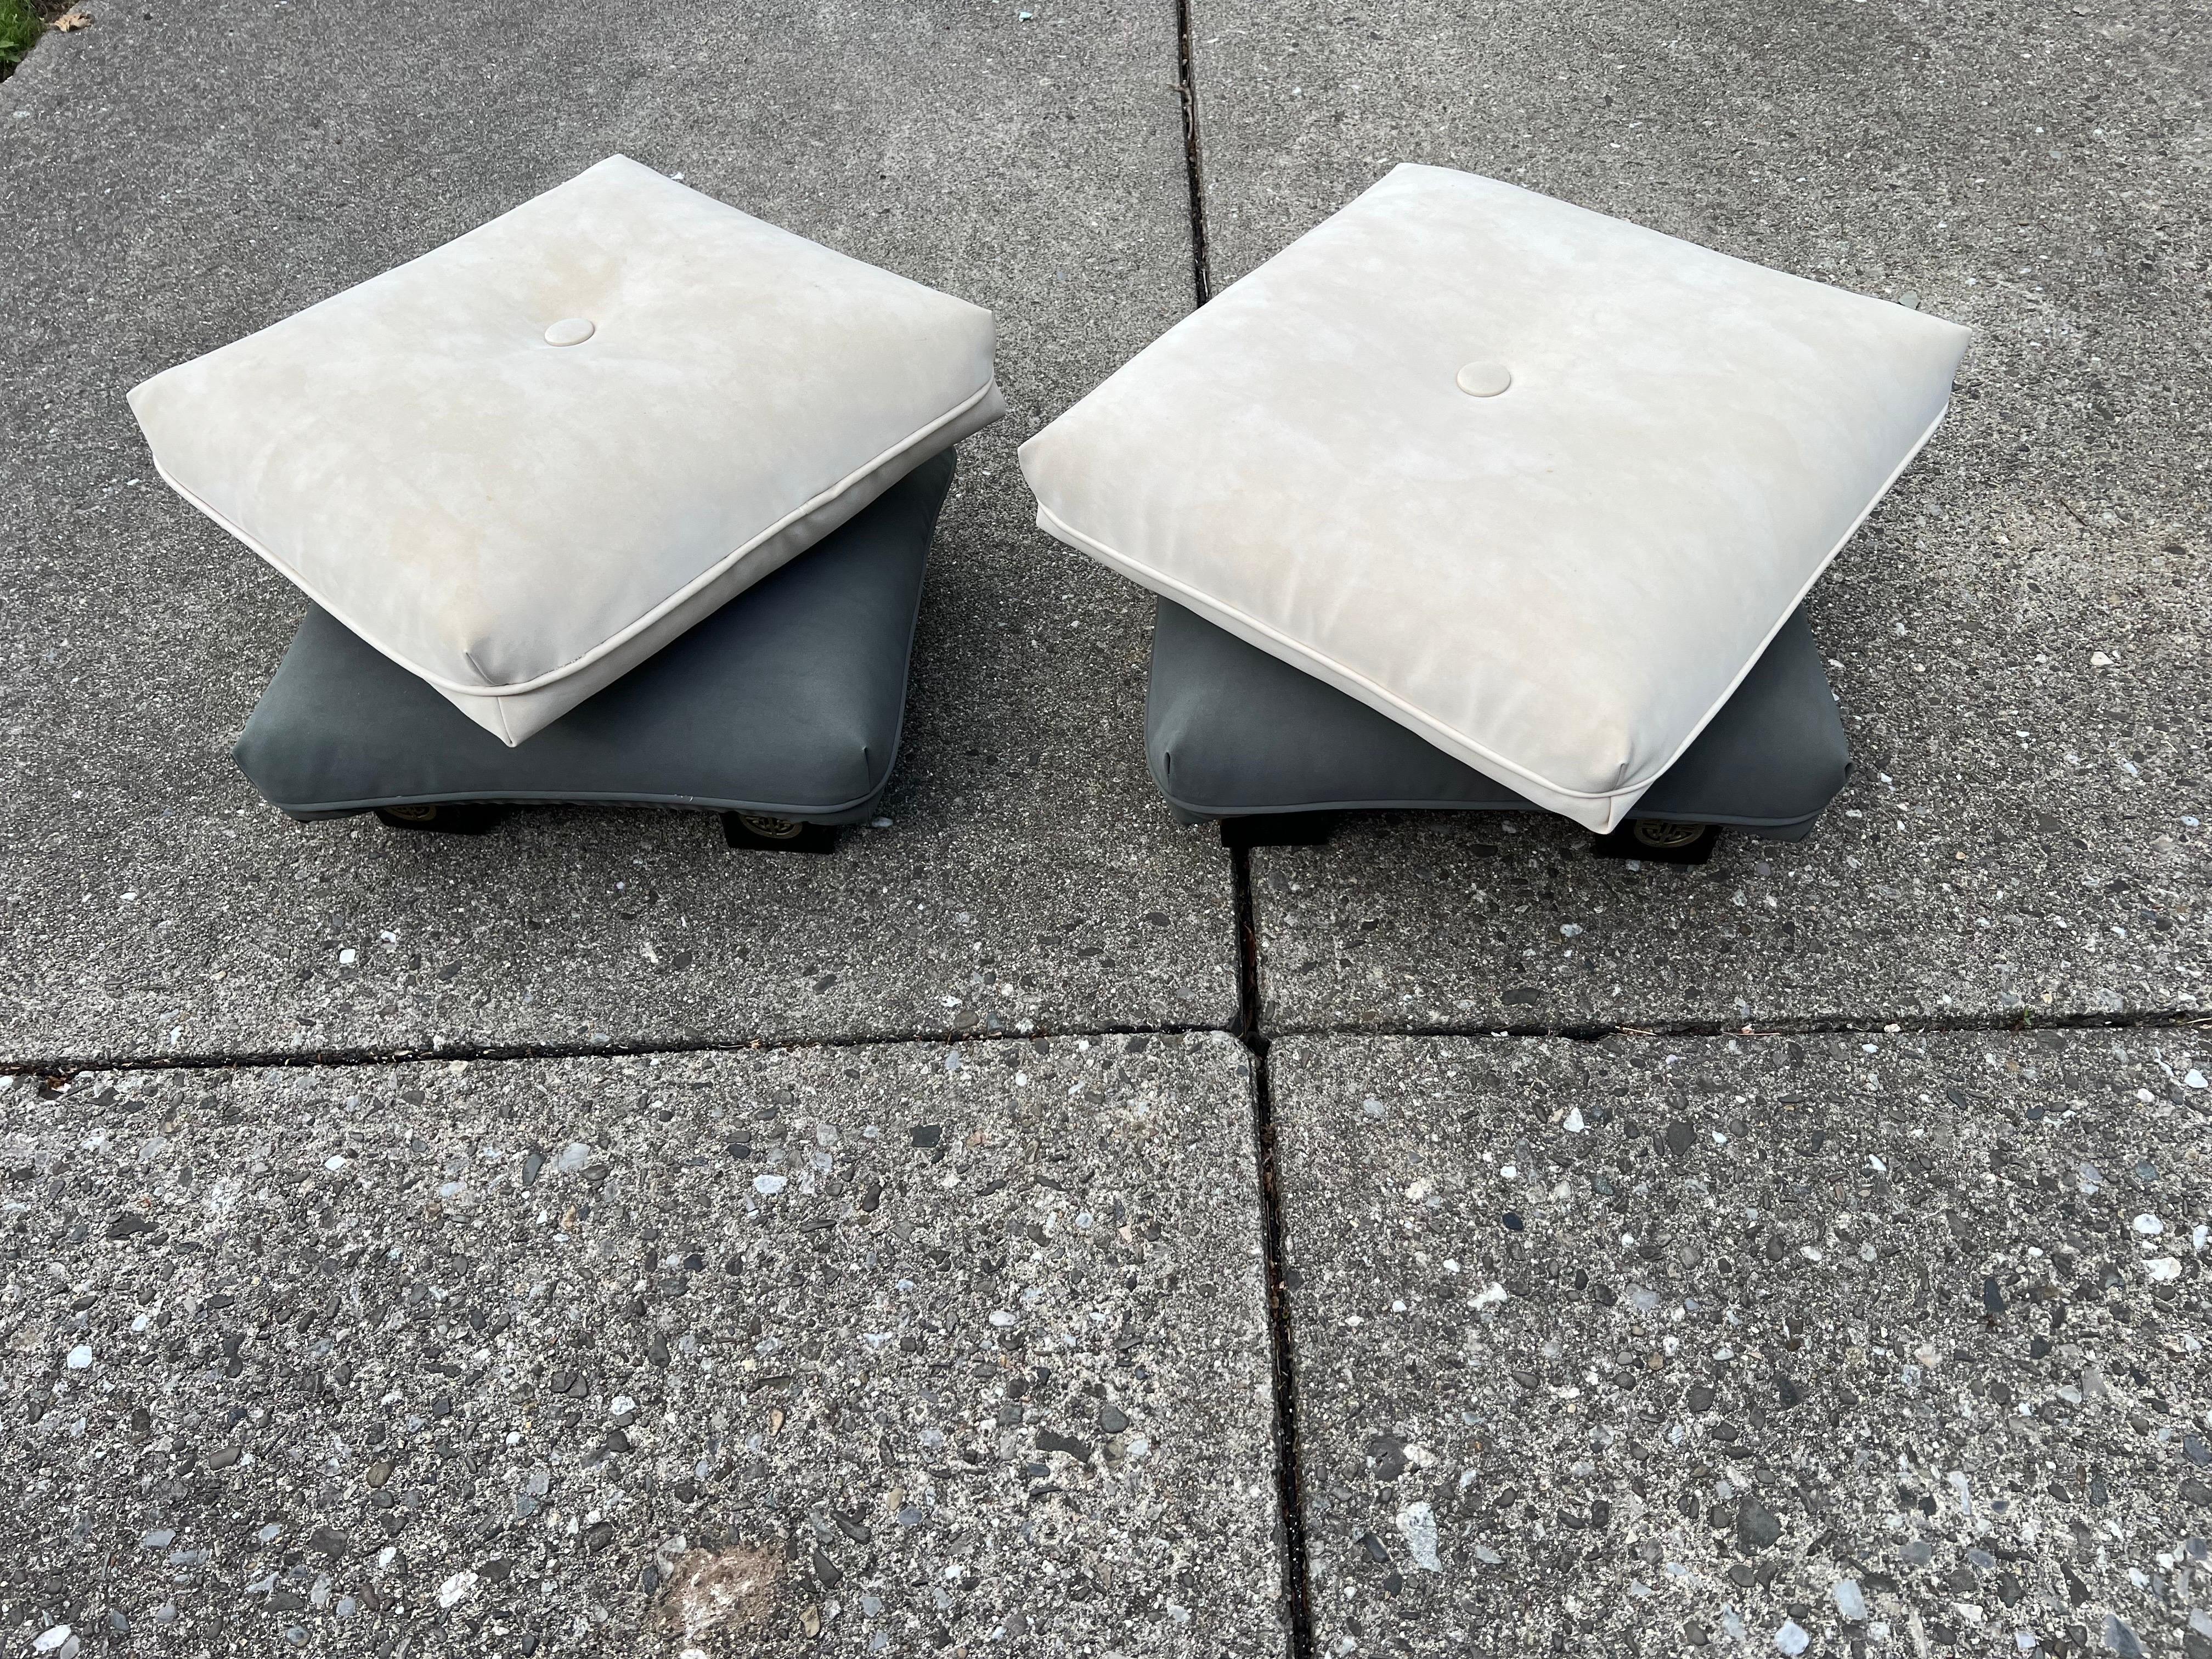 A pair of swivel ottomans made of ultrasuede from the 1980s.

Each ottoman has the top part which is in beige white color and the bottom base is in grayish green color. The legs of the ottoman has the brass oriental details.